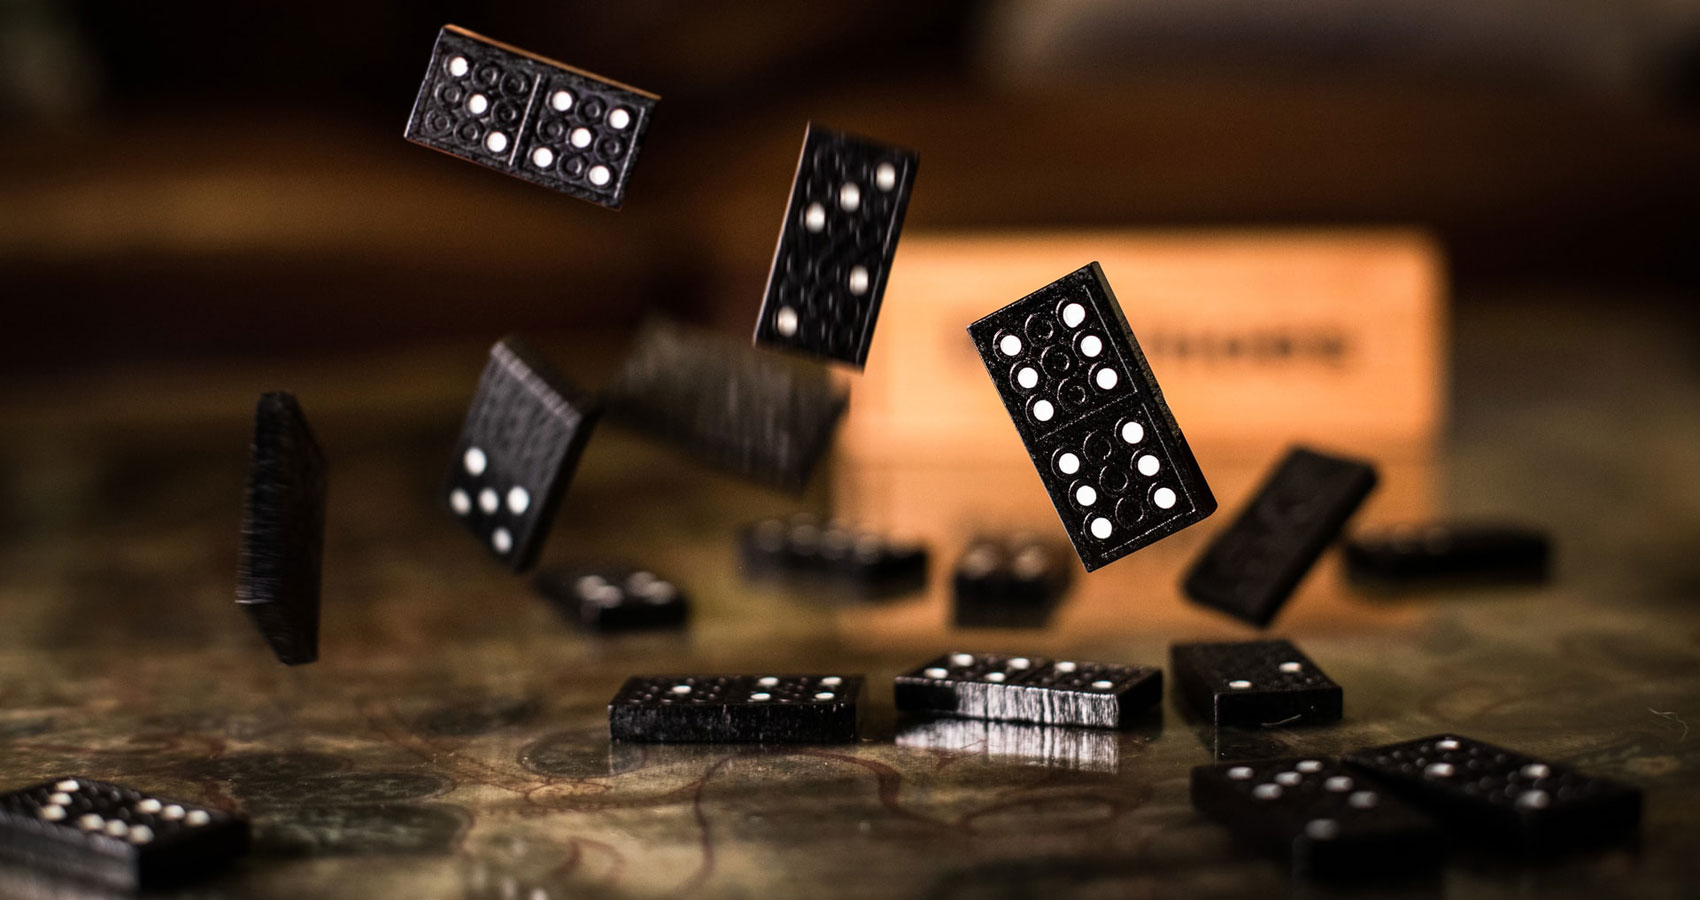 Domino Effect, micropoetry written by Christine E. Ray at Spillwords.com